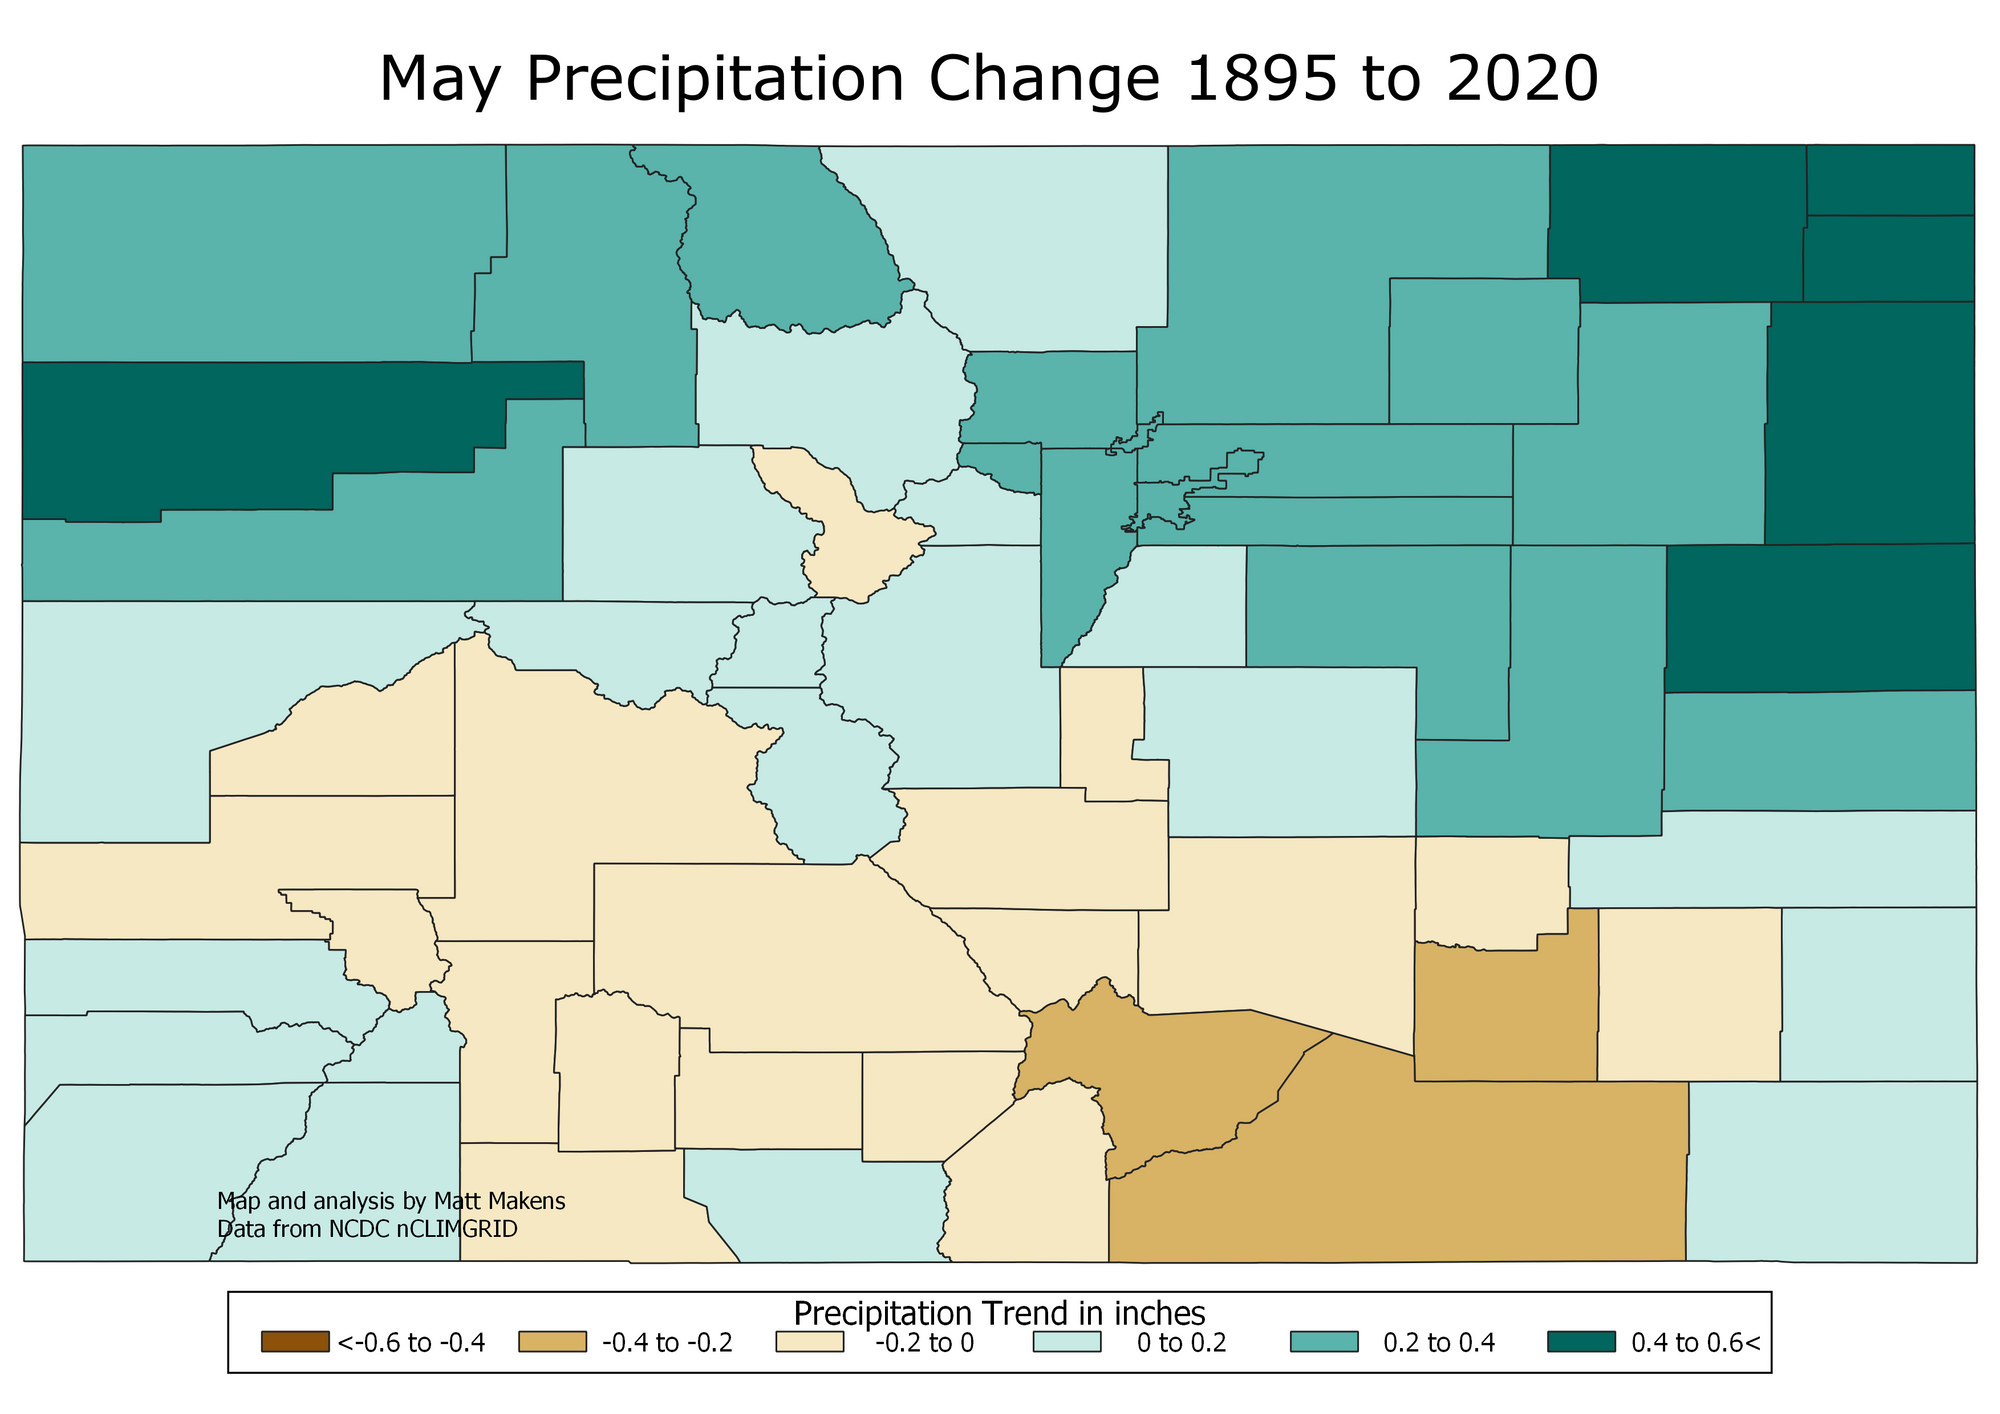 Analyzing Colorado's precipitation trends over the last 125 years